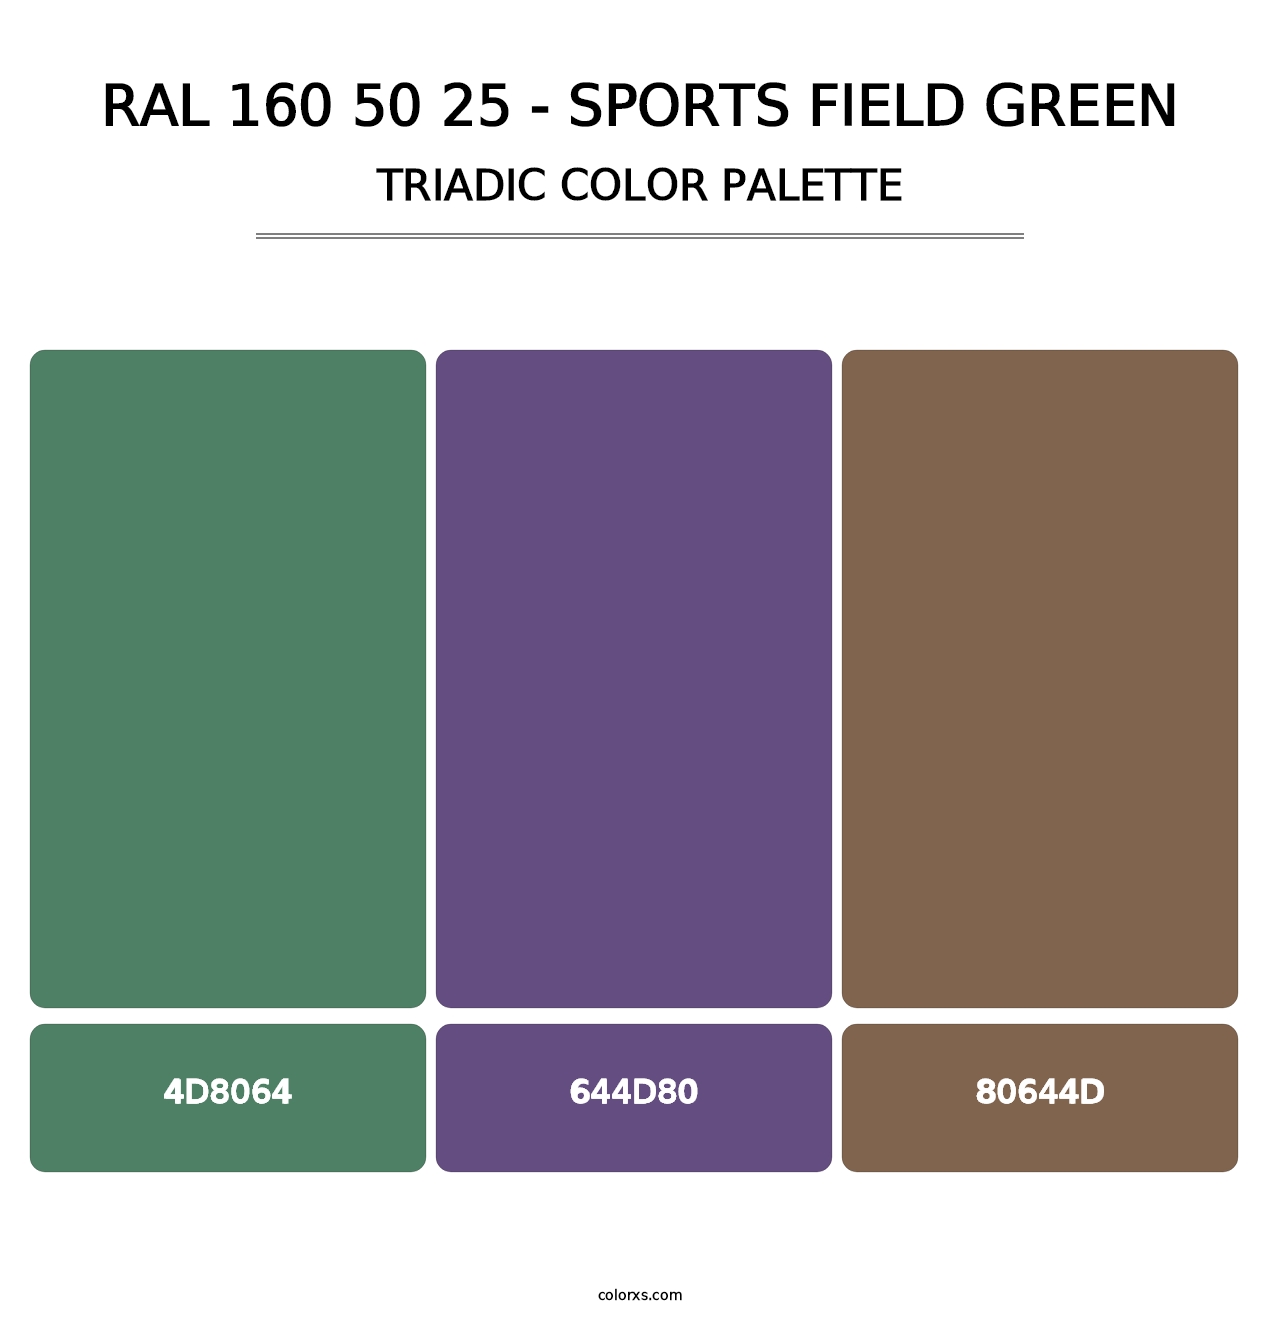 RAL 160 50 25 - Sports Field Green - Triadic Color Palette